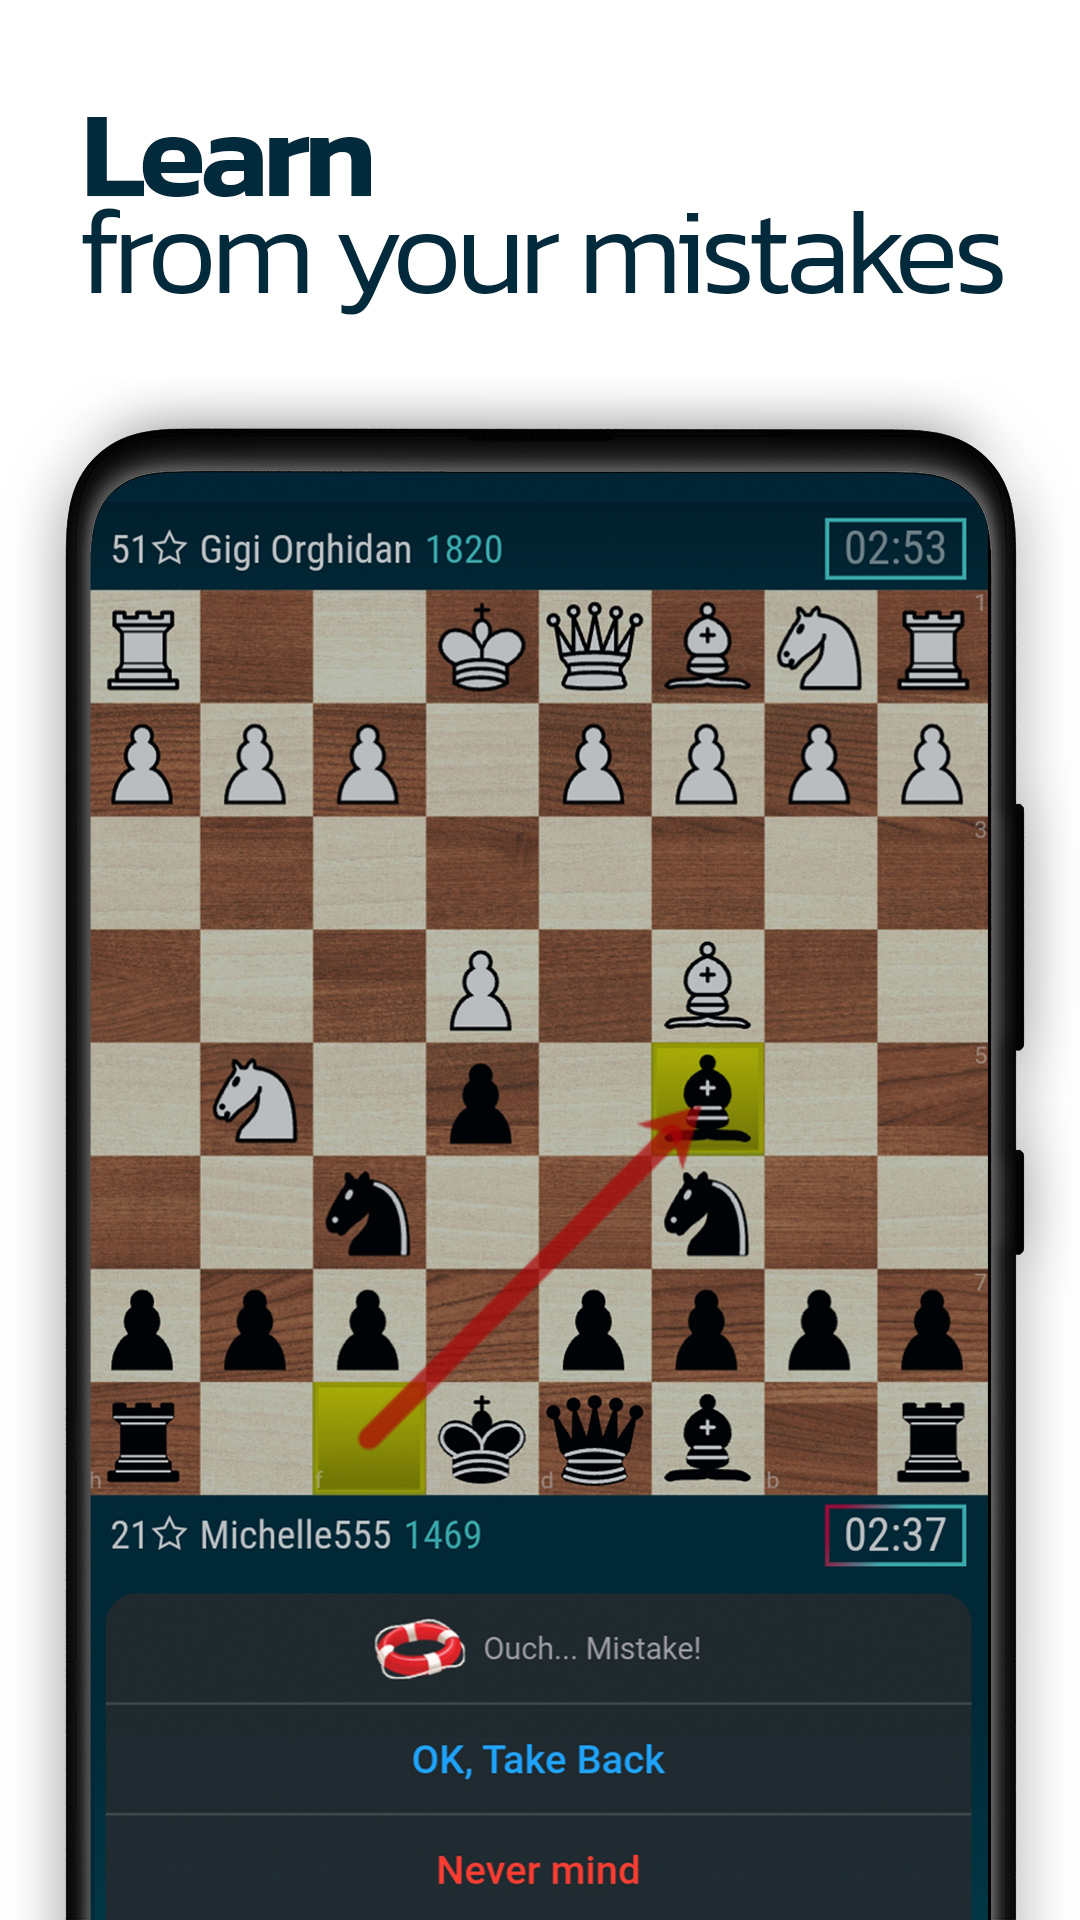 Play Mac Cooey's Chess online